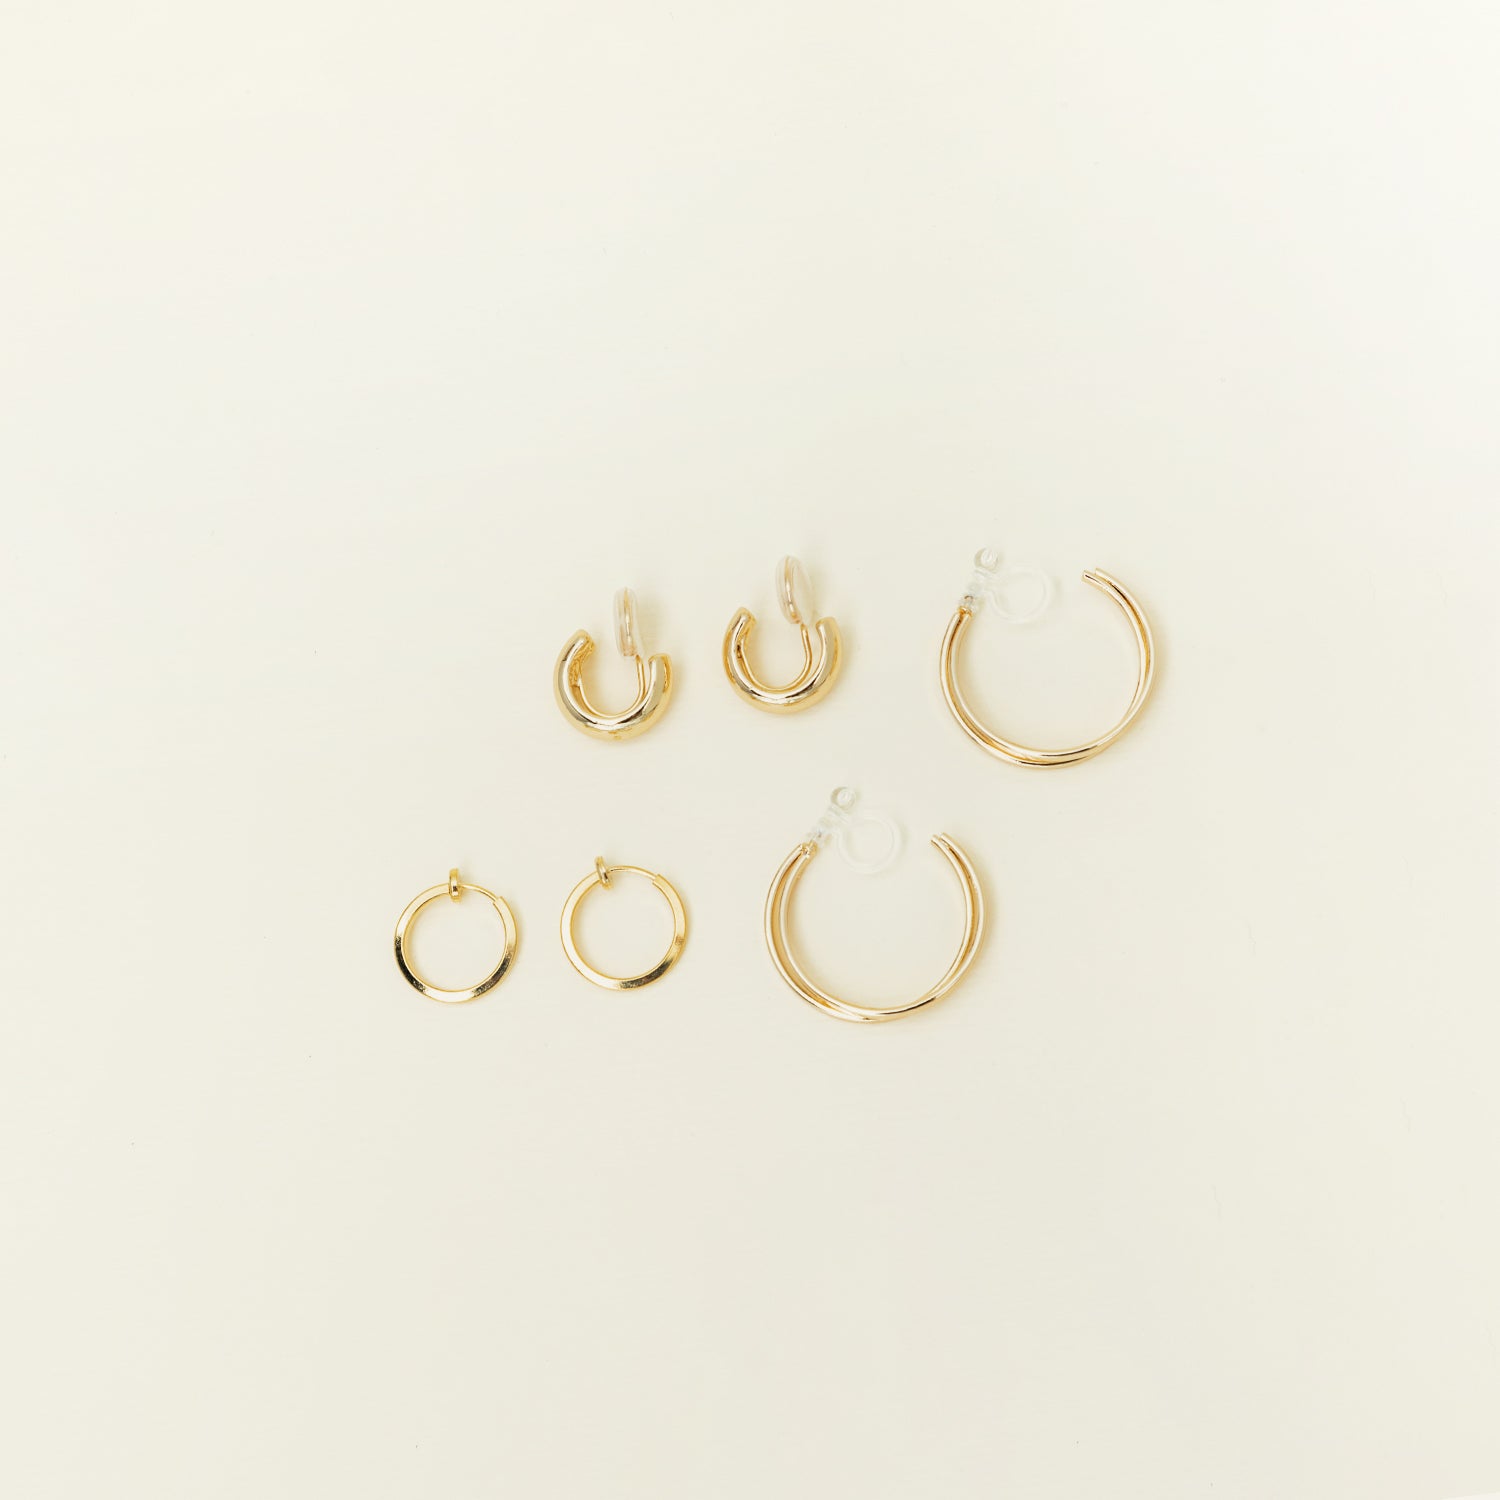 Image of the Everyday Essentials Set comes with three pairs of earrings featuring an Invisible Resin, Sliding Spring and Mosquito Coil closure. The set includes a Simple Gold Huggie Clip-On, Mini Hoop Earrings, and Gold Cassie Hoop Earrings, all crafted of Gold tone plated alloy, Stainless steel, or Gold Tone Metal Alloy. It is also available in Silver.